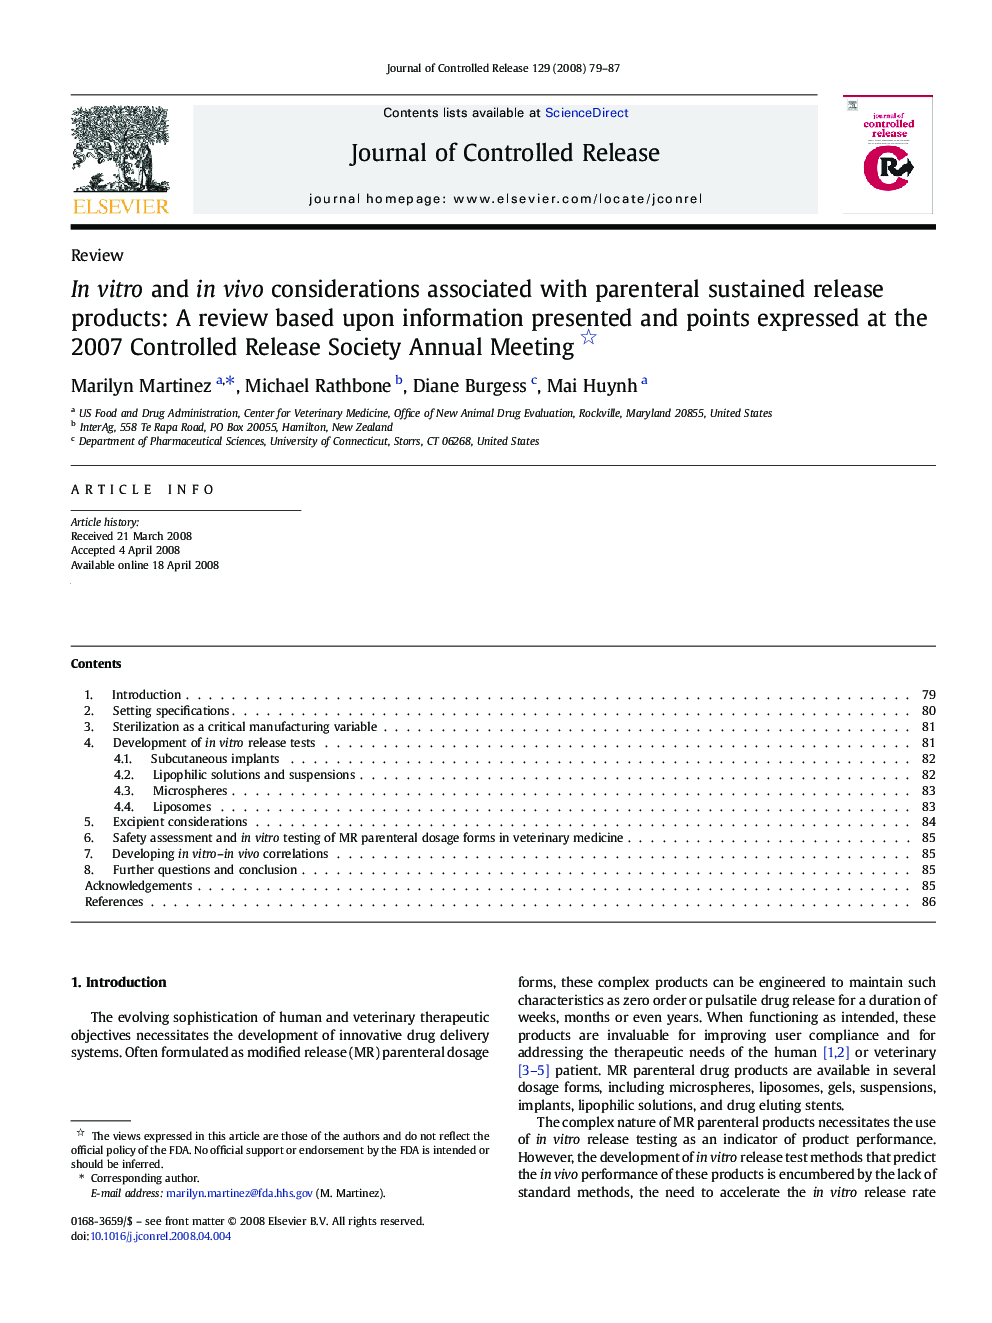 In vitro and in vivo considerations associated with parenteral sustained release products: A review based upon information presented and points expressed at the 2007 Controlled Release Society Annual Meeting